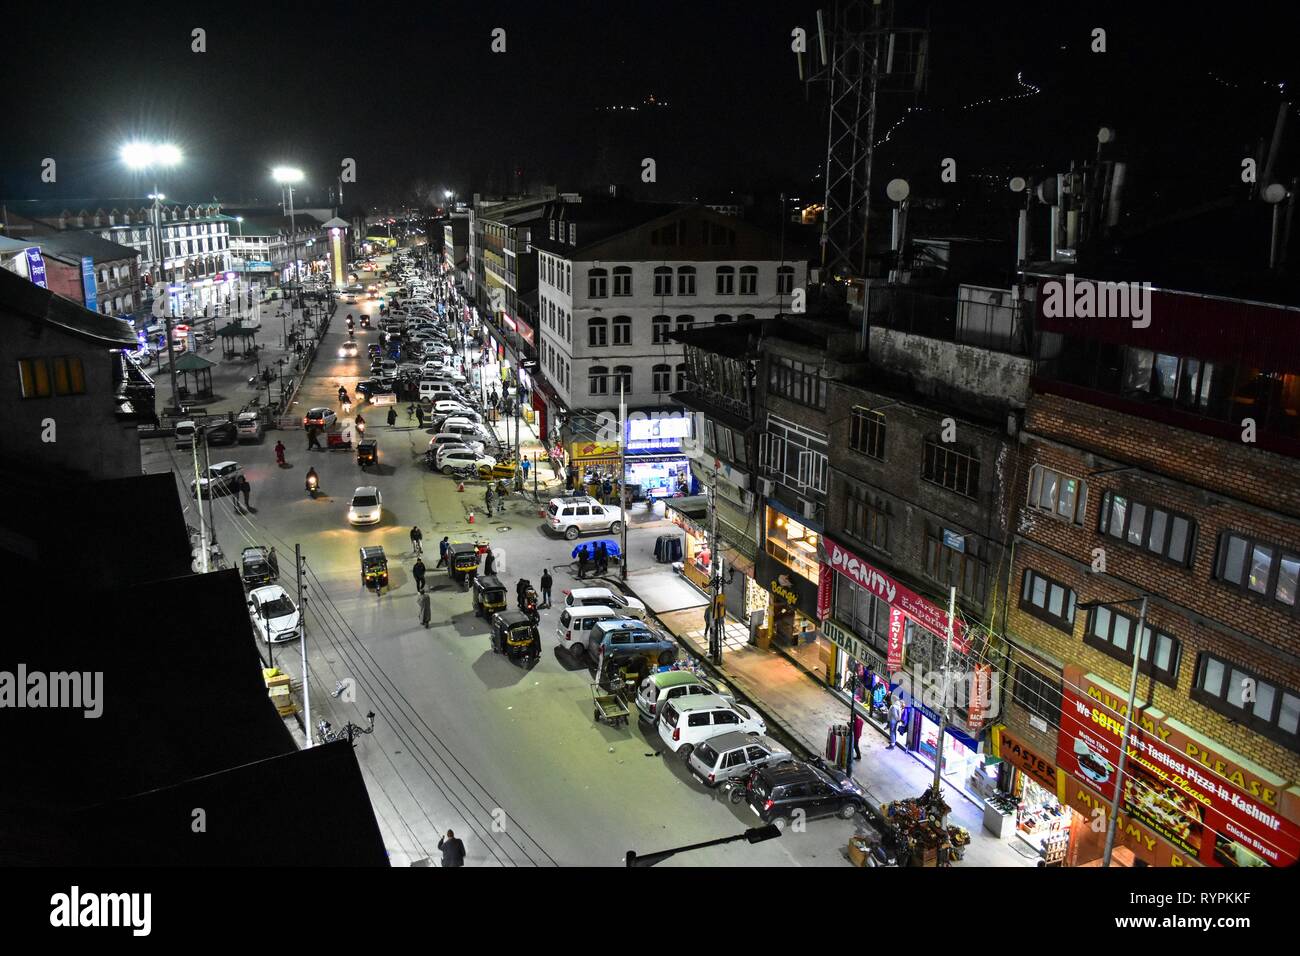 People seen busy shopping at a commercial hub Lal chowk during night hours in Srinagar, Kashmir. Kashmir is the northernmost geographical region of the Indian subcontinent. It is currently a disputed territory, administered by three countries: India, Pakistan and China. Stock Photo